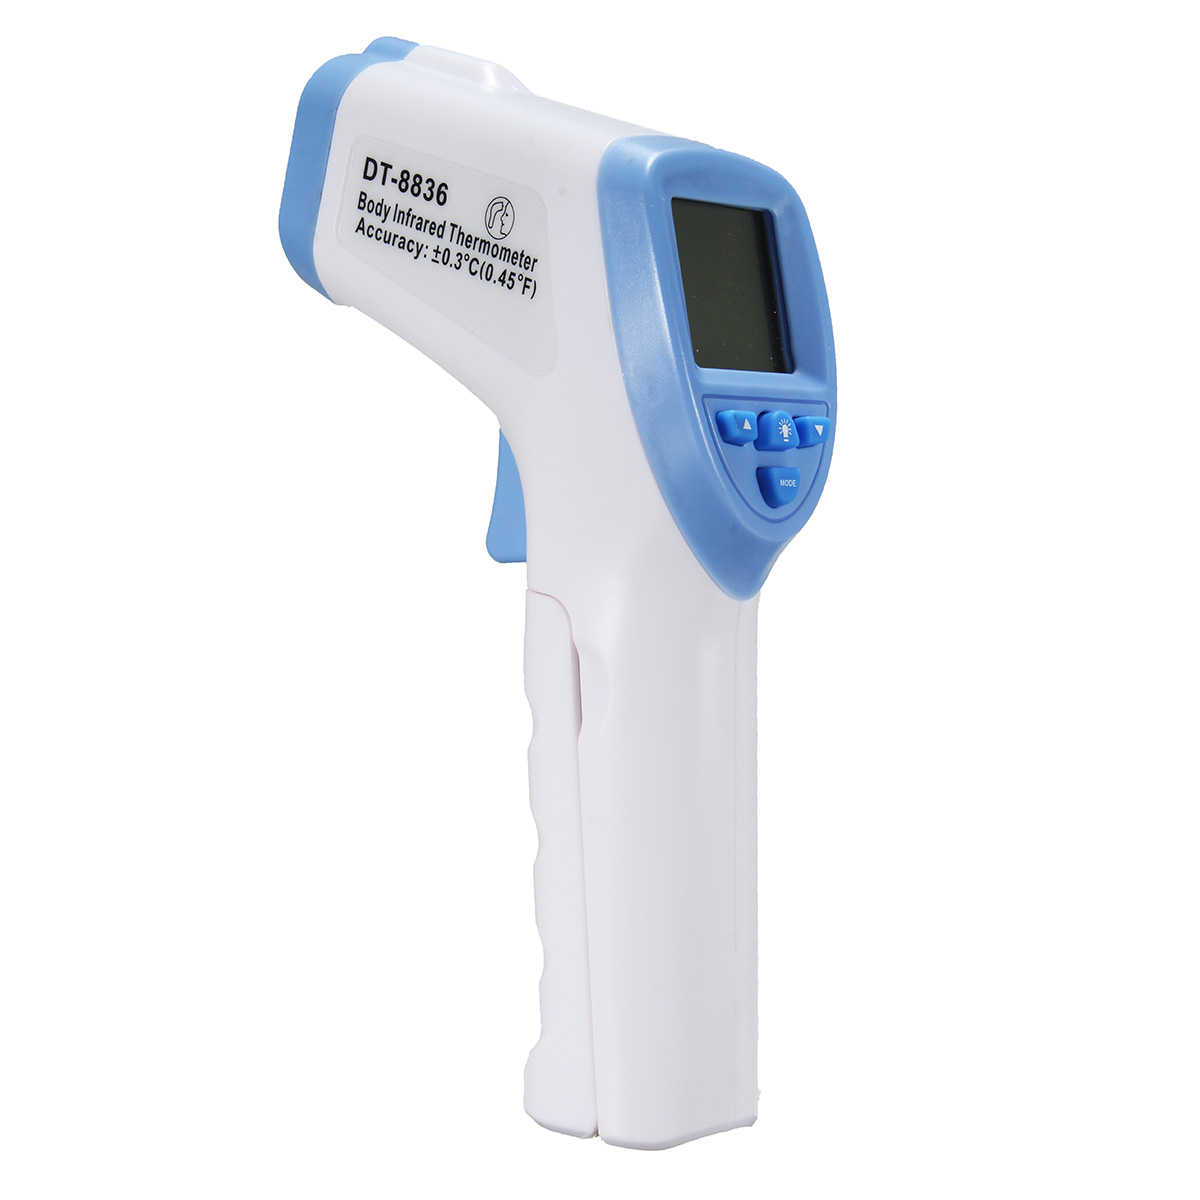 Digital-Non-Contact-No-Touch-Infrared-Forehead-Thermometer-DigitalThermometer-Measuring-Range-32-425-1132170-4